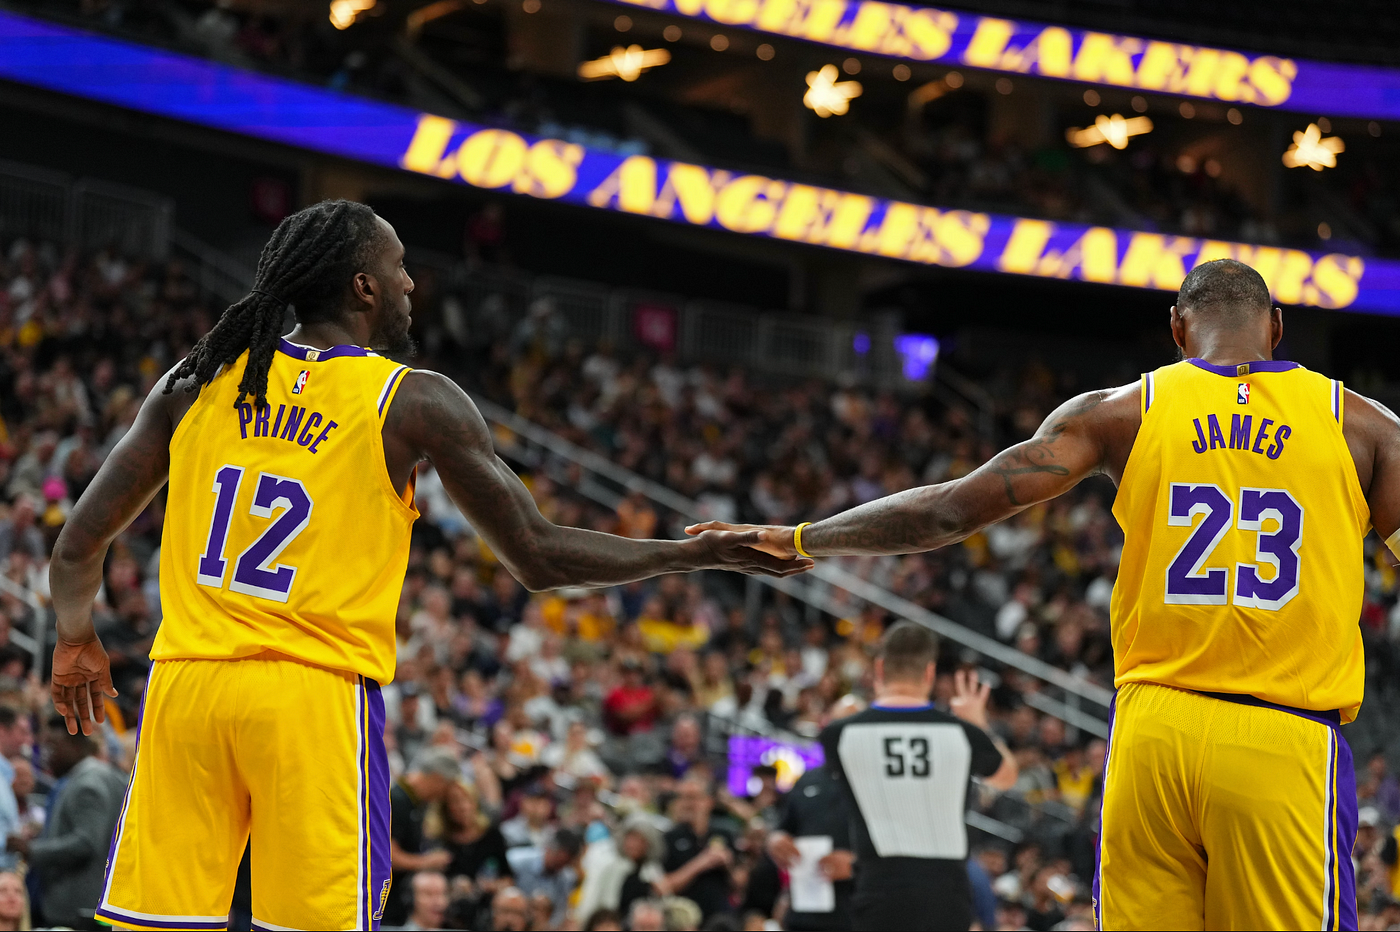 Recap of Lakers Media Day and what's to come this season for your 2022–23  Lakers., by Carlos Yakimowich